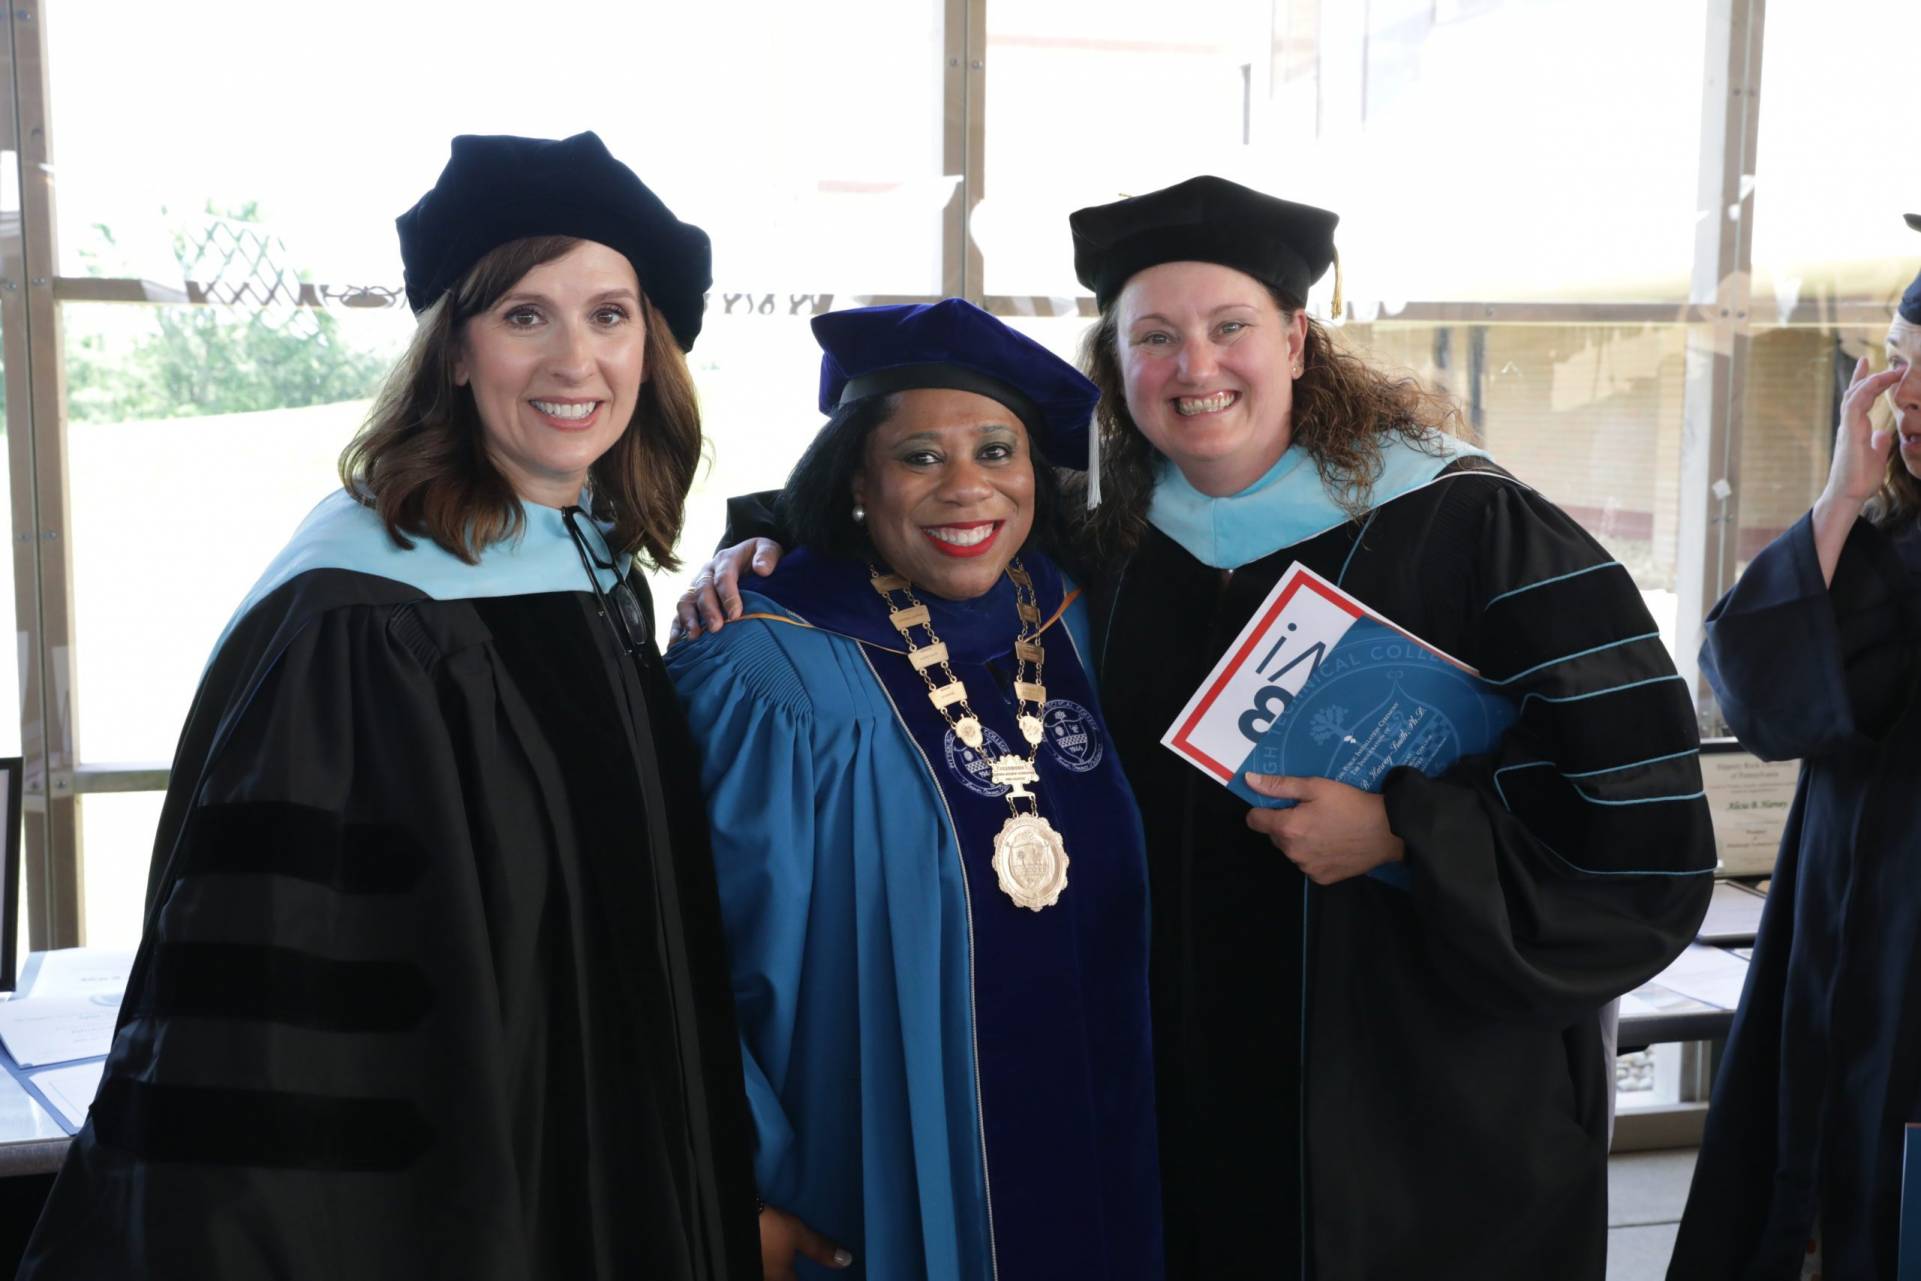 A photo of Dr. Harvey-Smith posing with a guest from the Installation Ceremony.